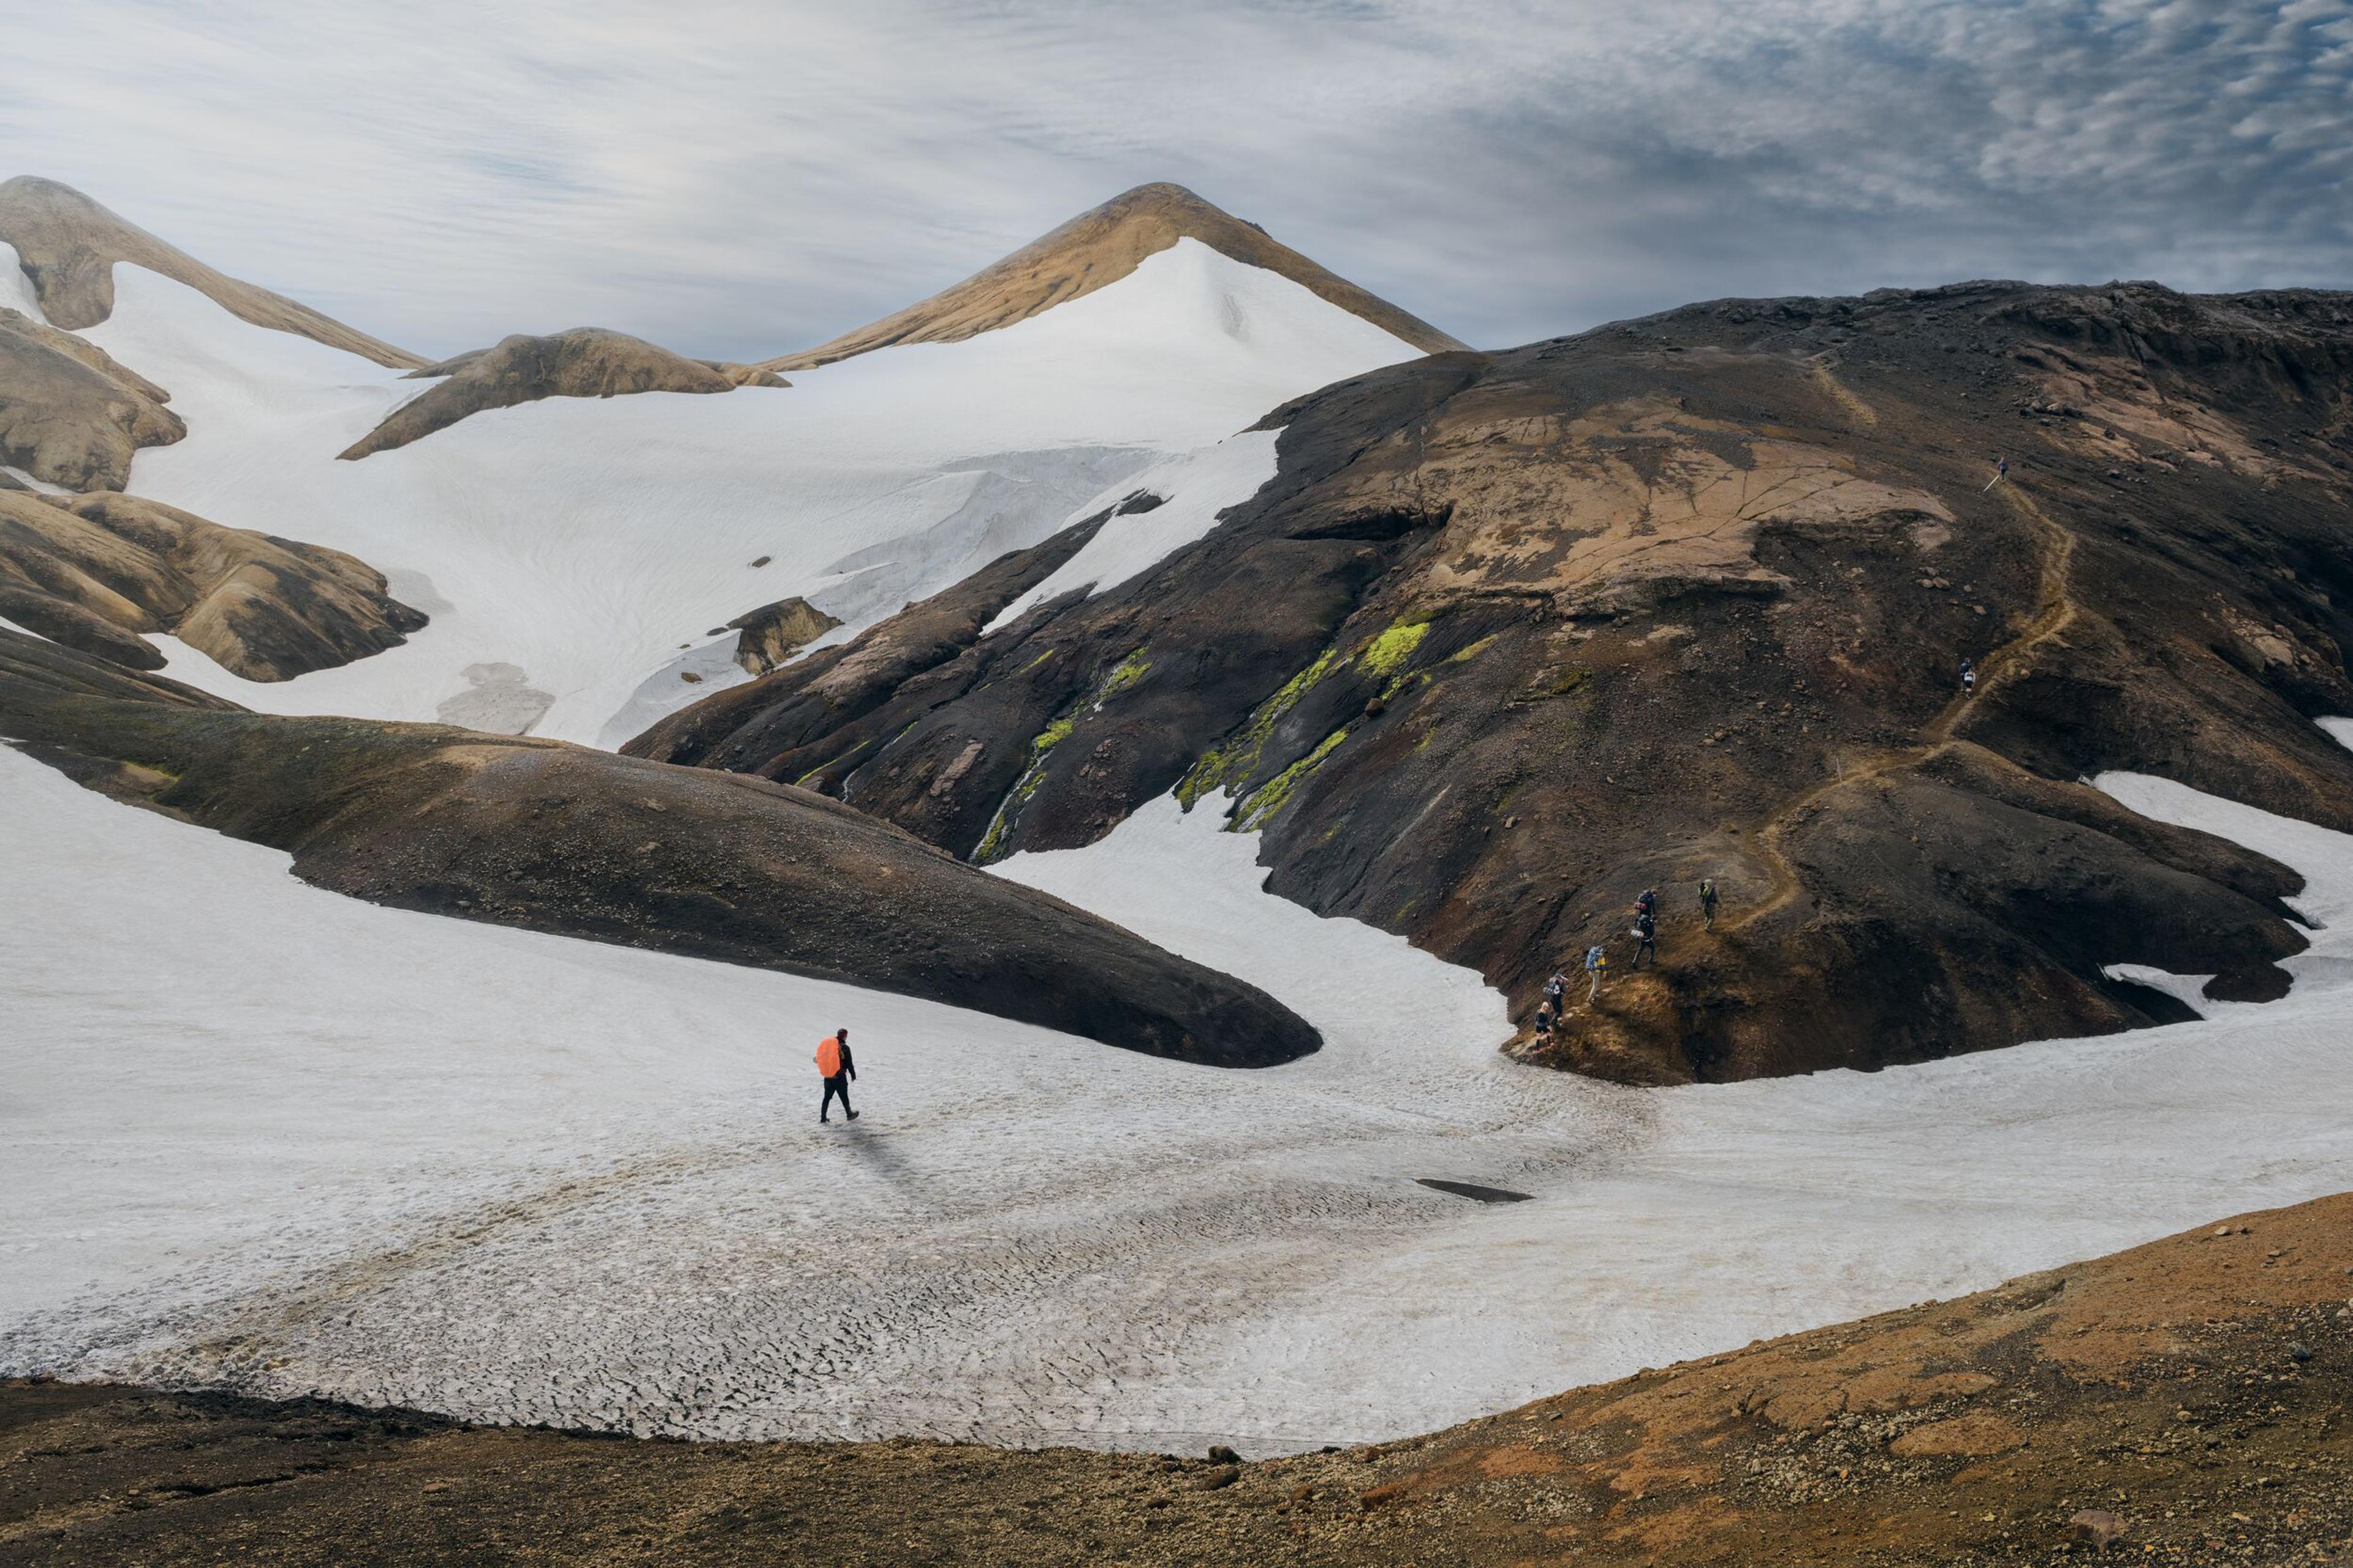 Hiker traversing a snowfield with the backdrop of brown and yellow mountains encircling the view.